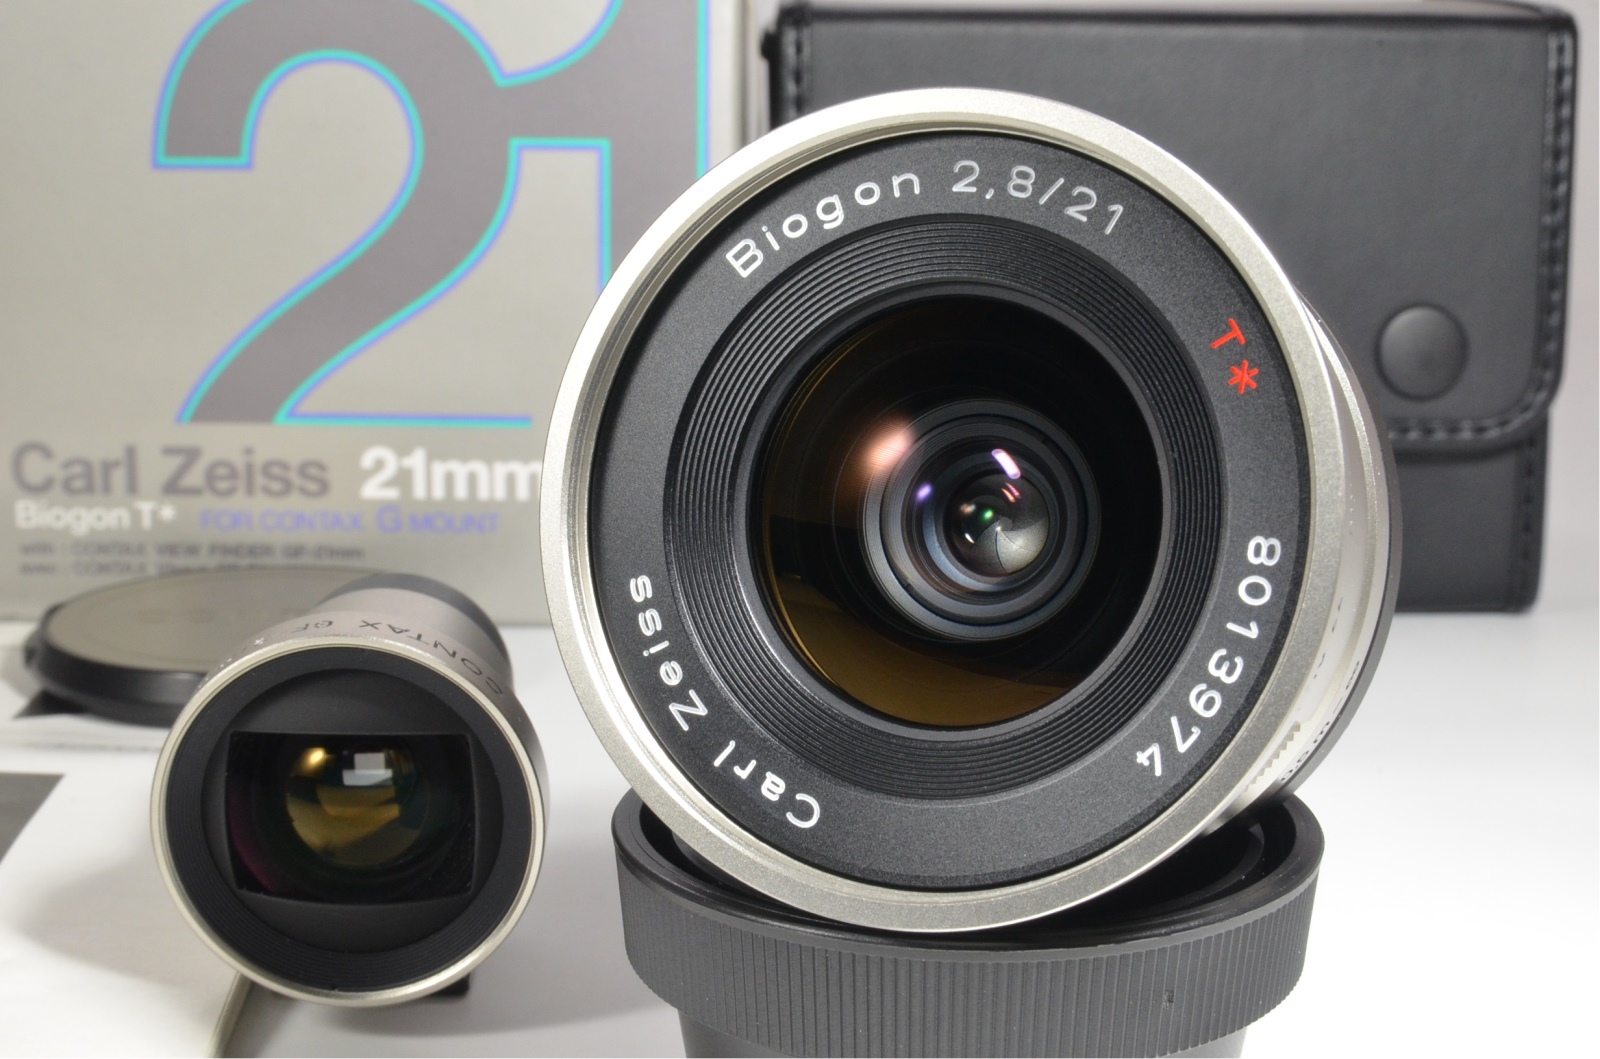 Contax Carl Zeiss T* Biogon 21mm f2.8 Lens with View Finder for G1